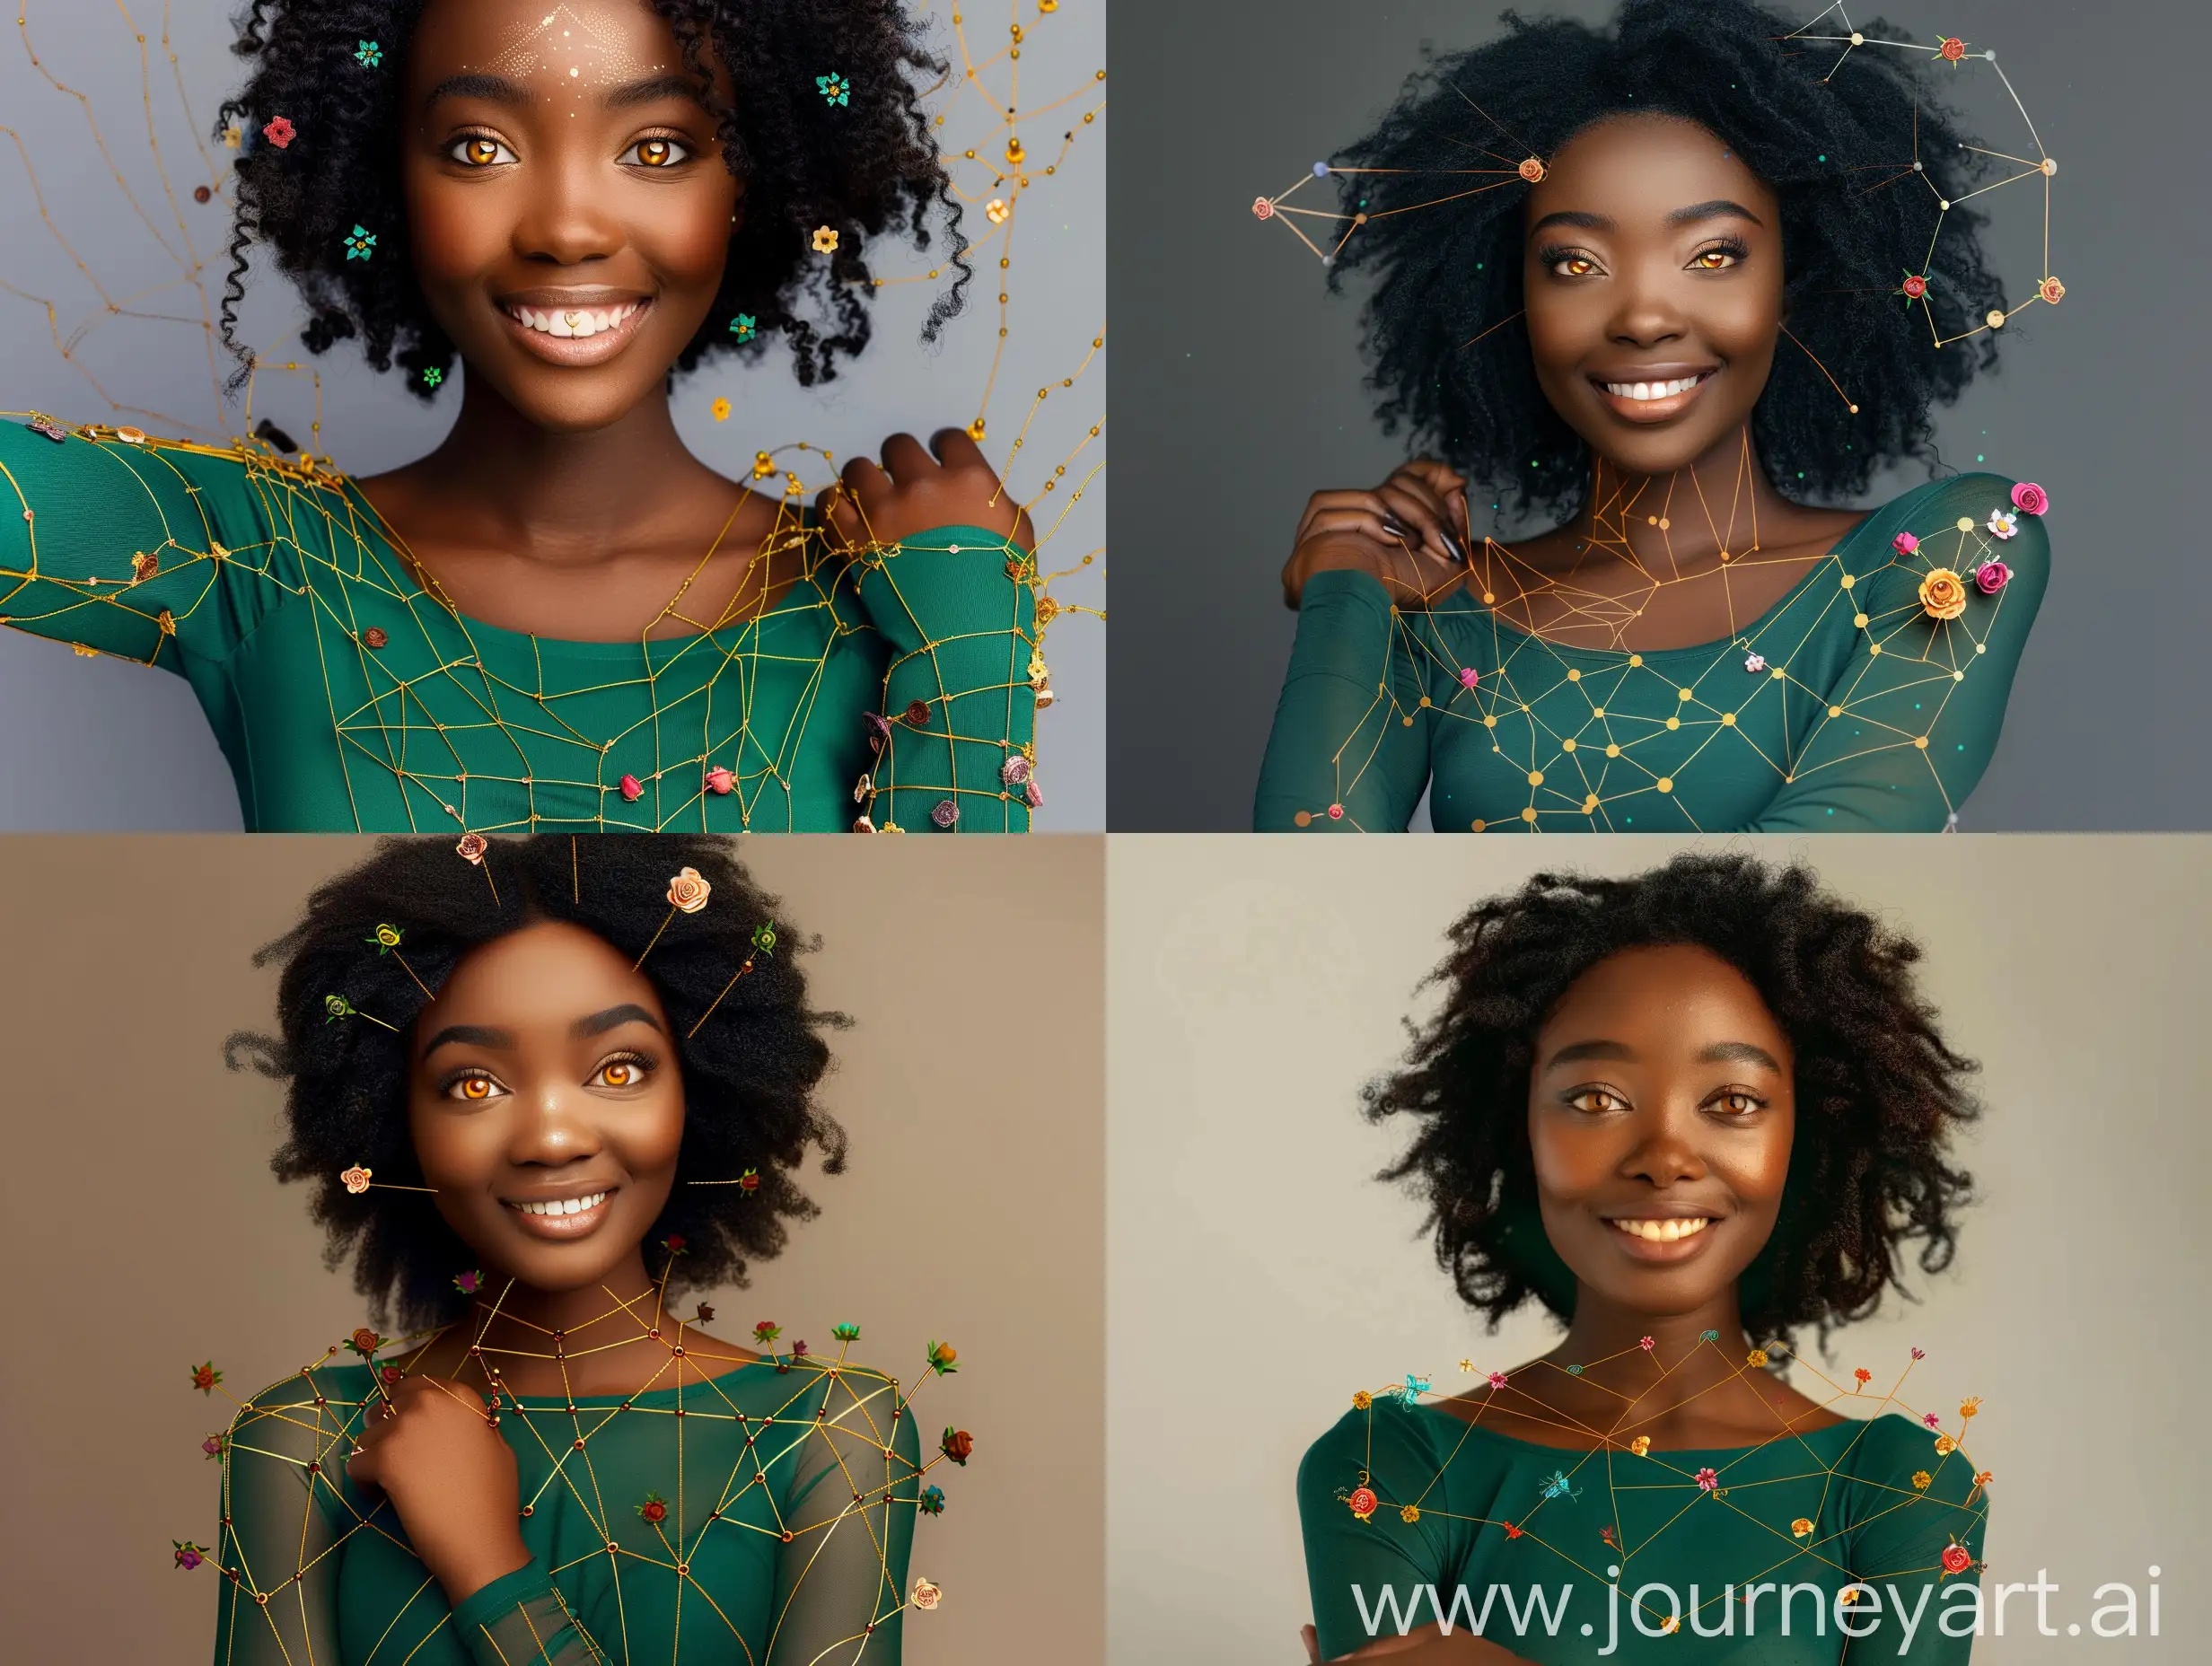 Smiling-African-Woman-with-Flowers-in-Hair-and-Emerald-Green-Top